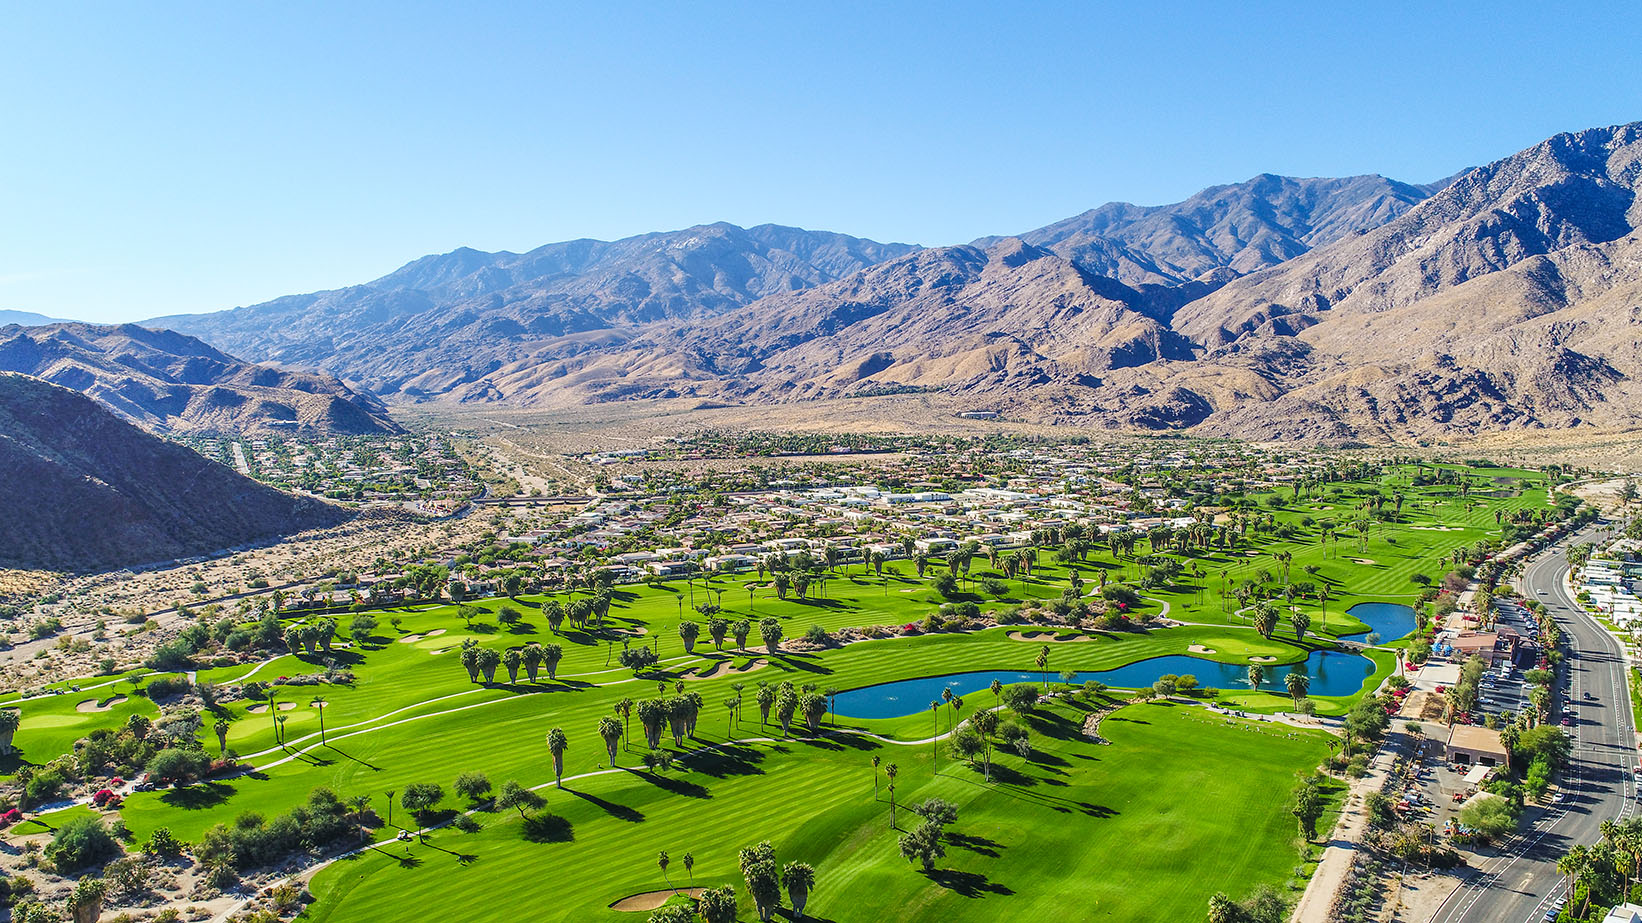 Aerial view of green golf course surrounded by desert hills